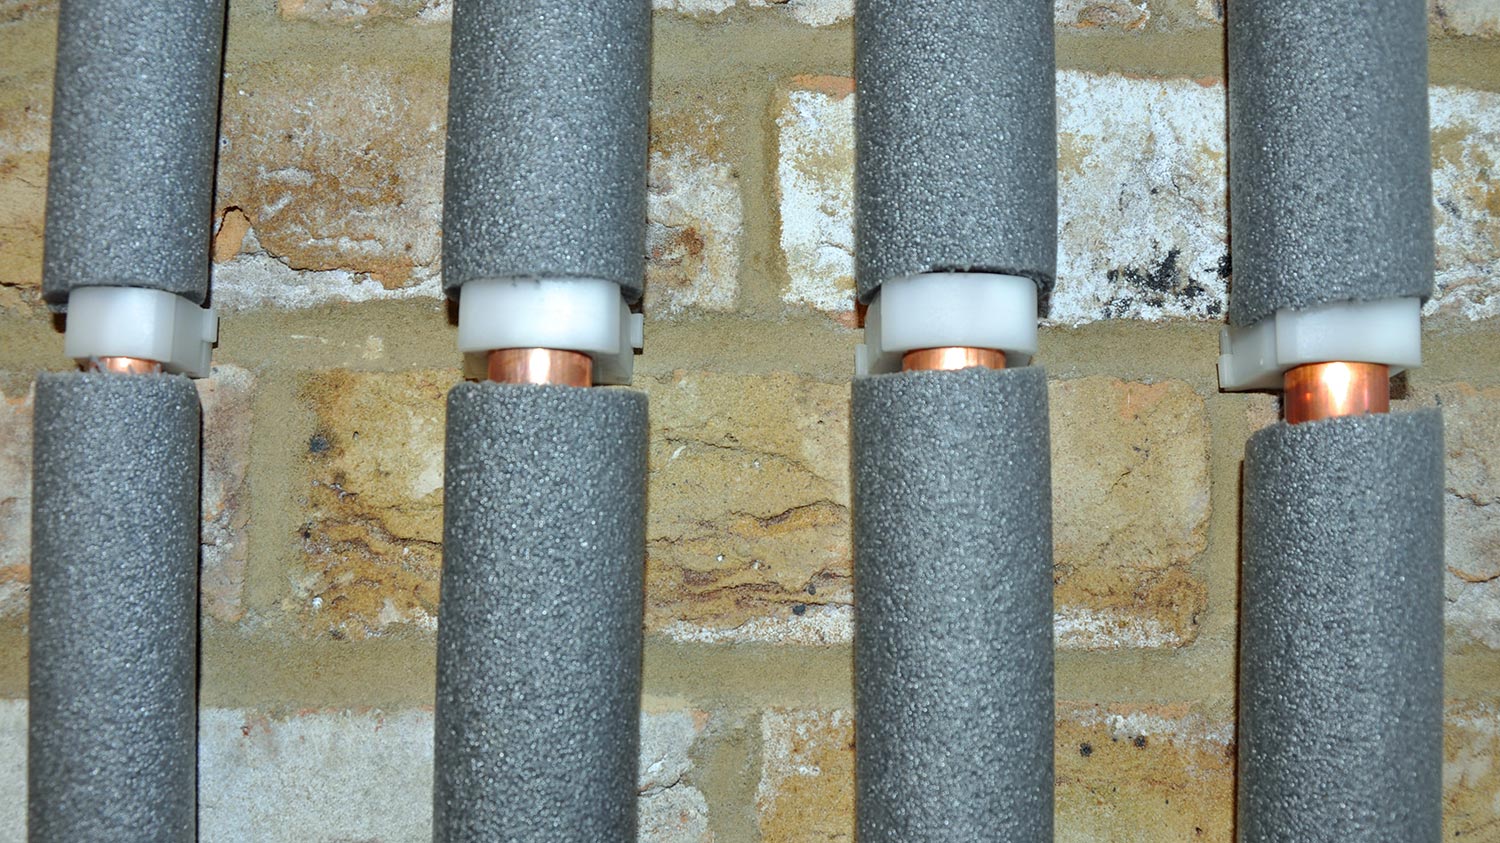 Four water pipes in grey foam insulation against a brick wall